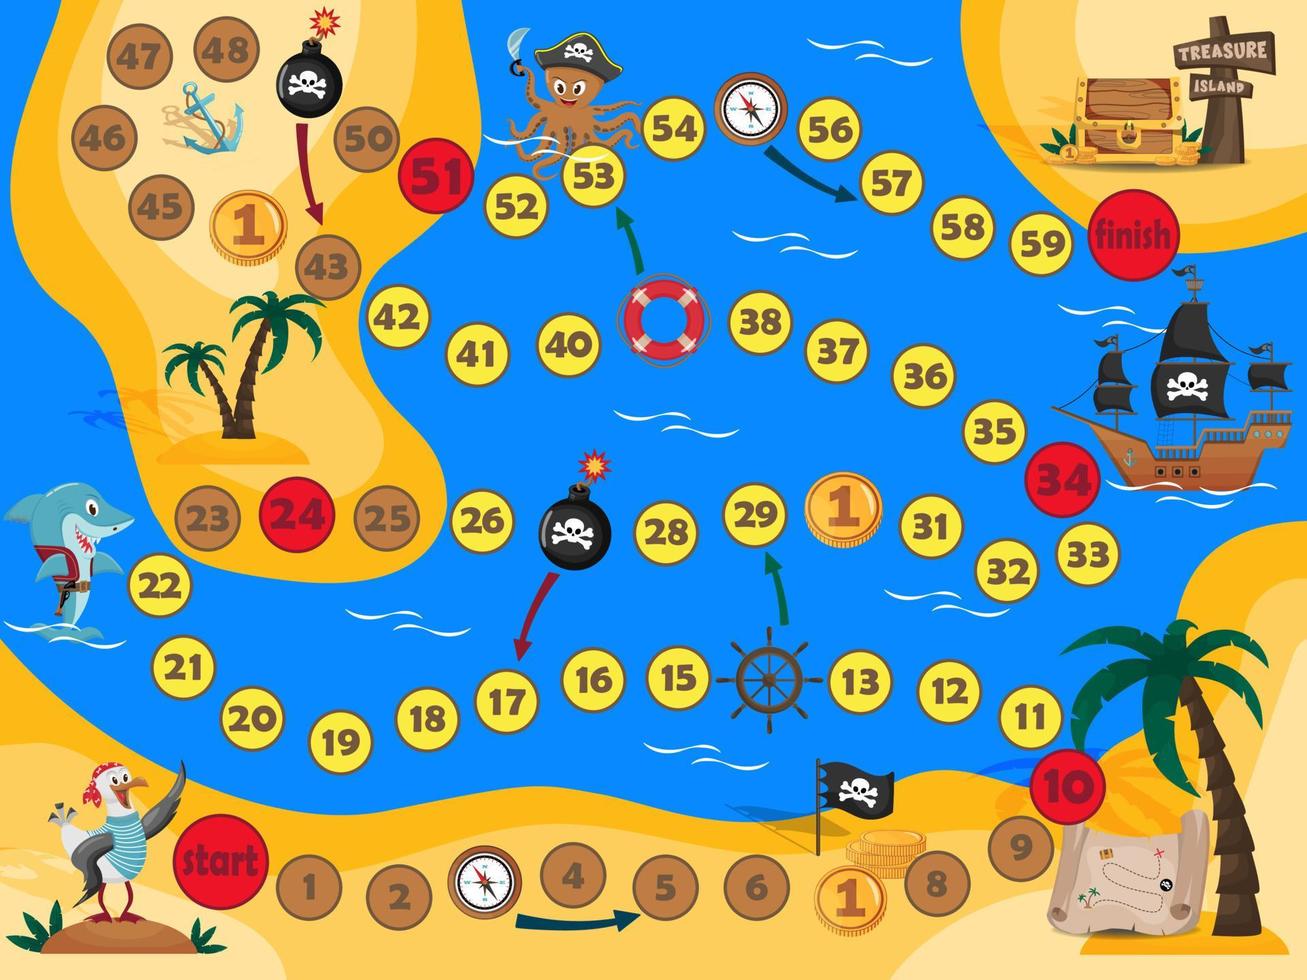 Pirate board game for kids. Vector illustration of a board game for children. Treasure Hunters. Guide the pirates along the route to the treasure island and get a chest of coins.